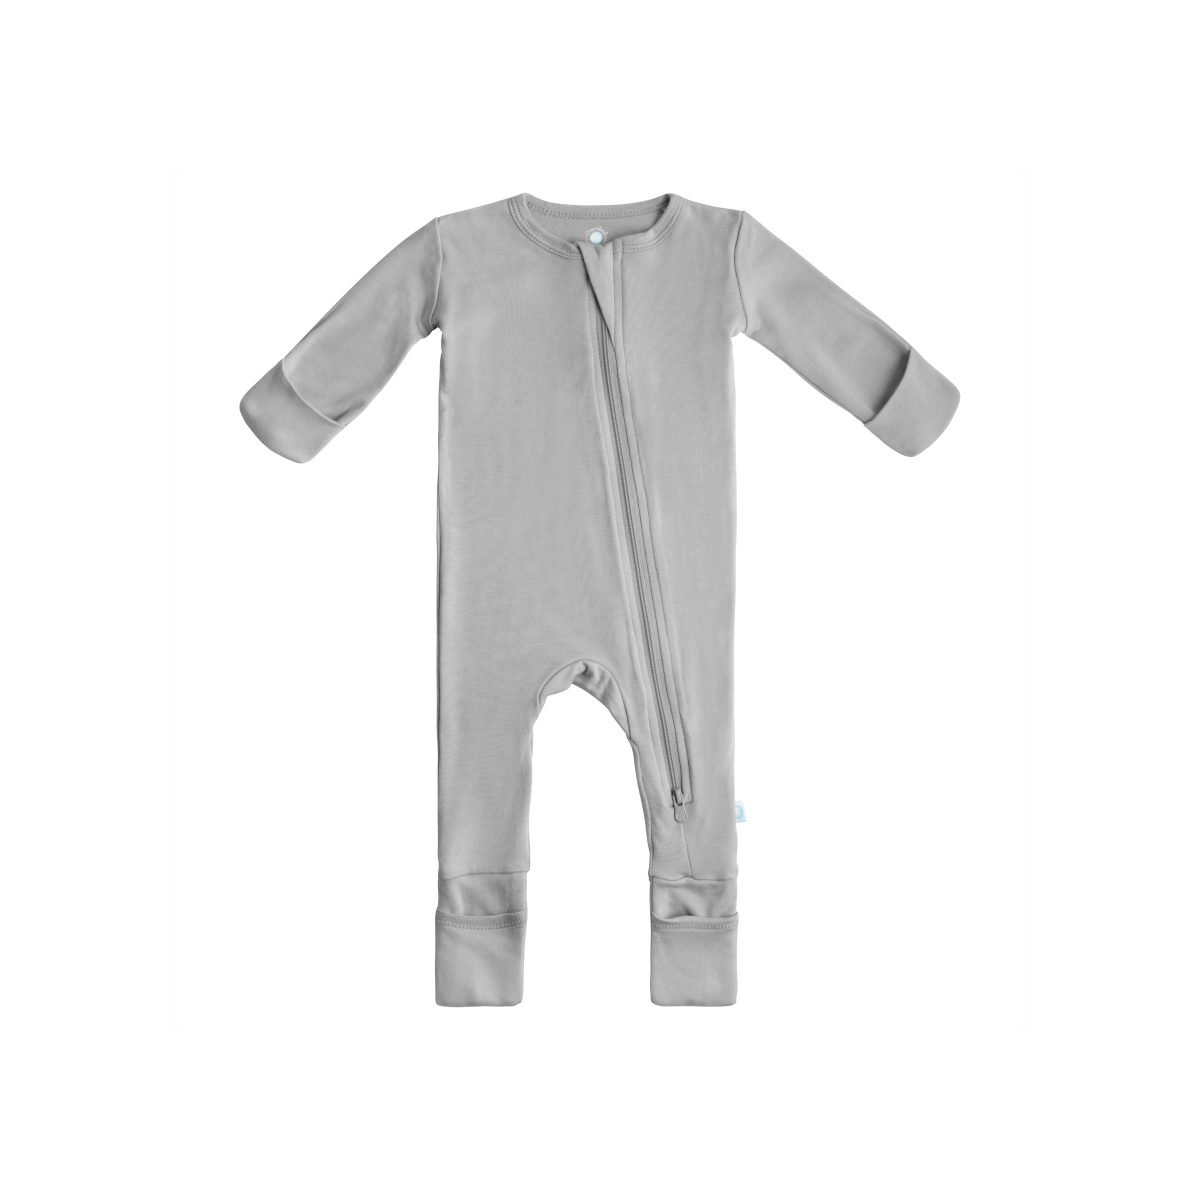 Baby Bamboo Pajamas w/ DreamCuffs - 11 Solids